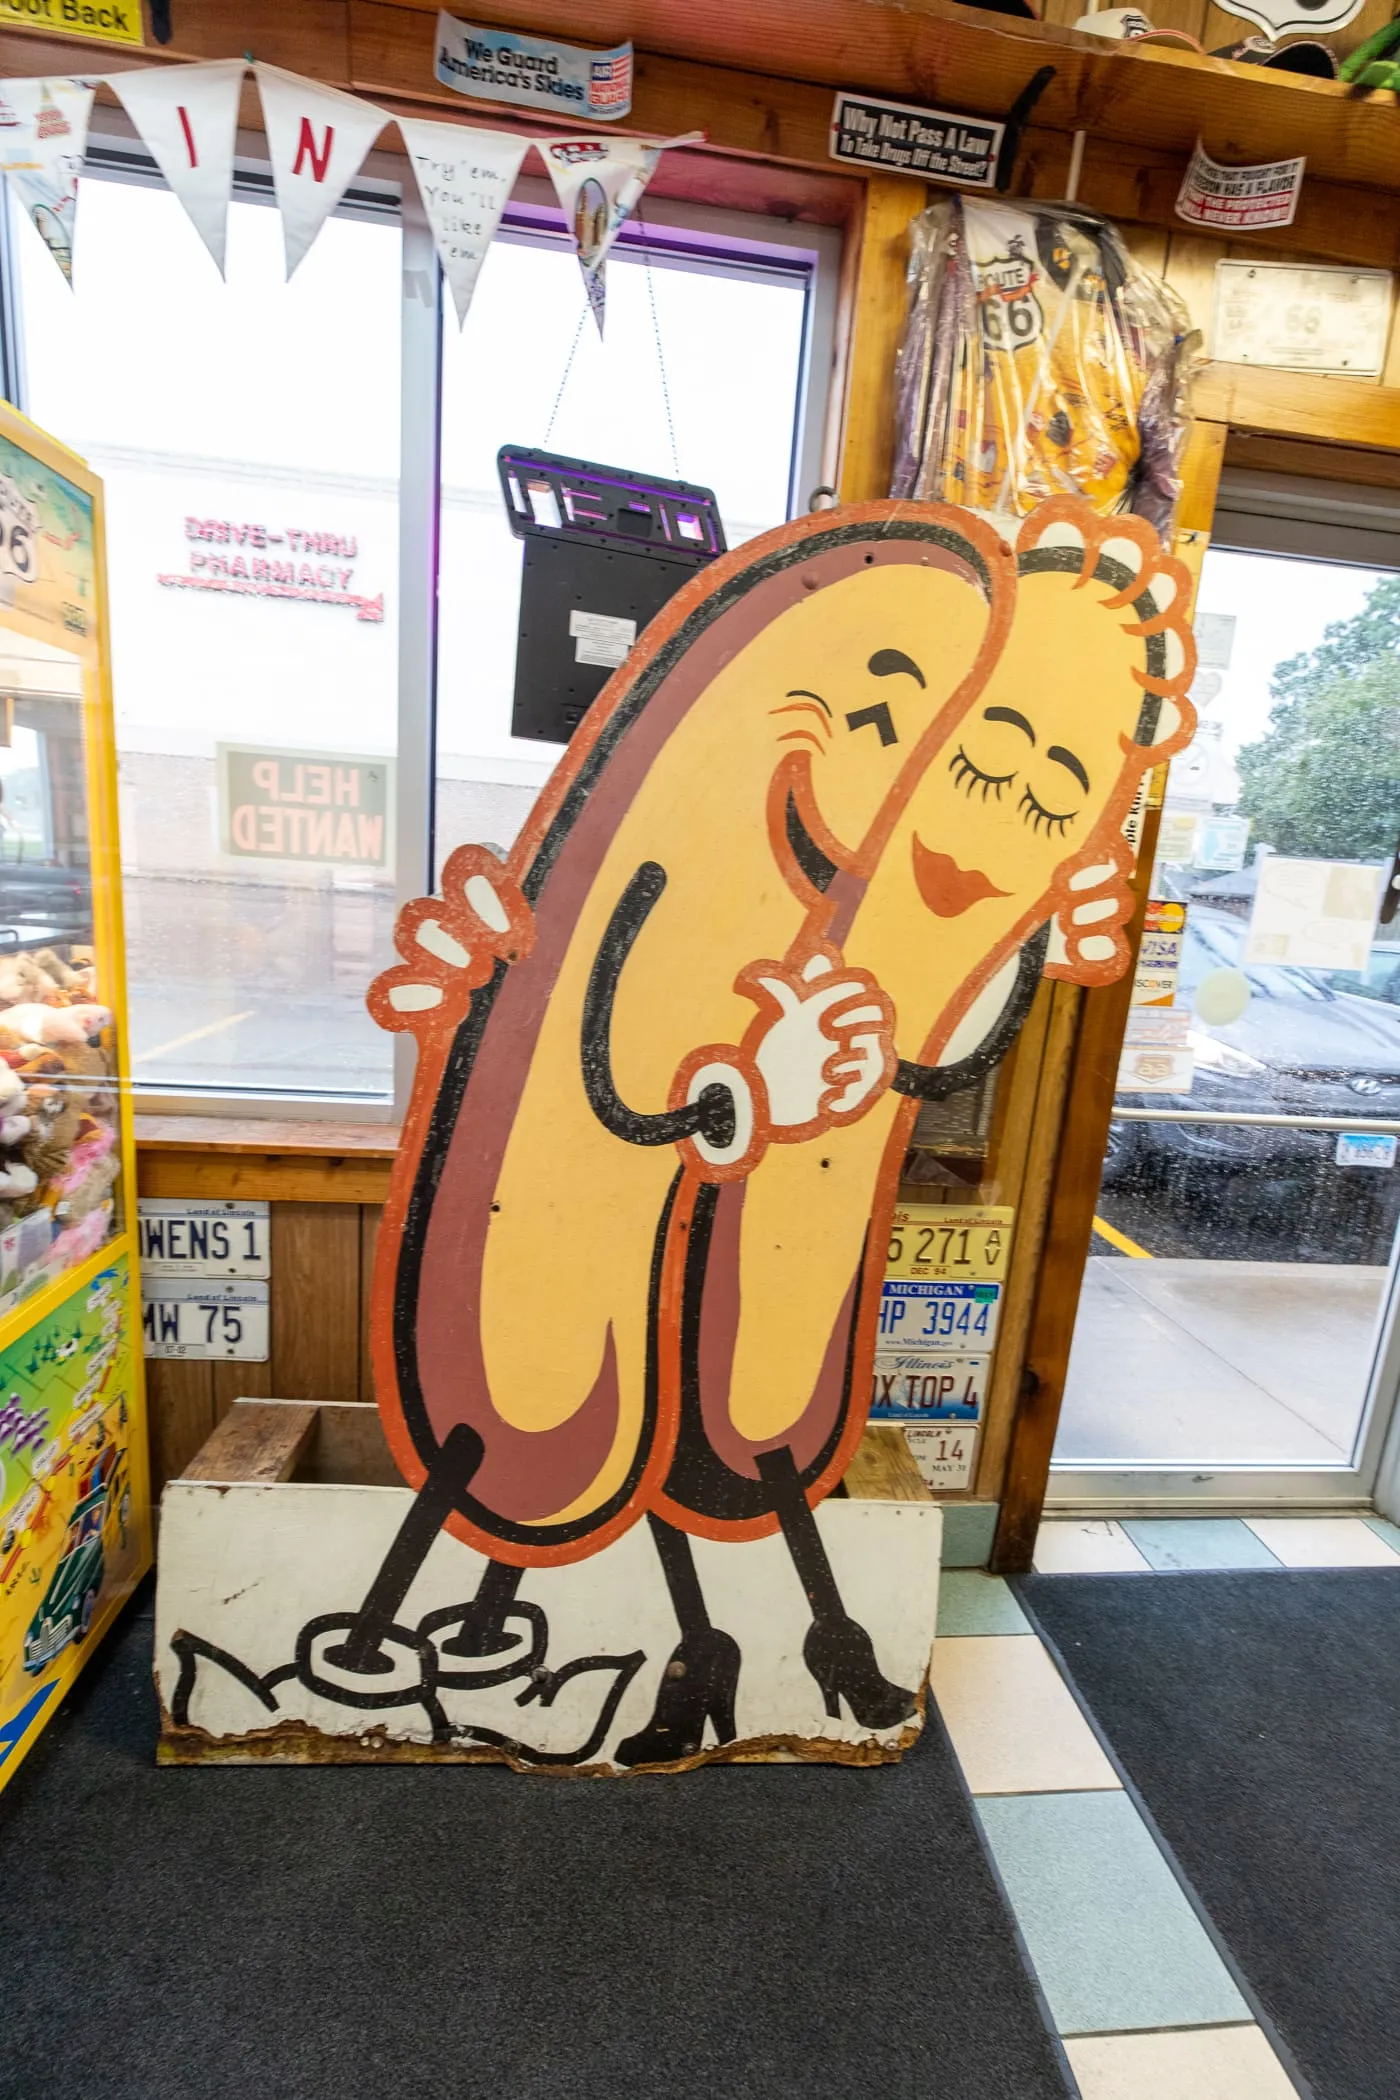 Corn dog dancing cutout at Cozy Dog Drive In in Springfield, Illinois on Route 66